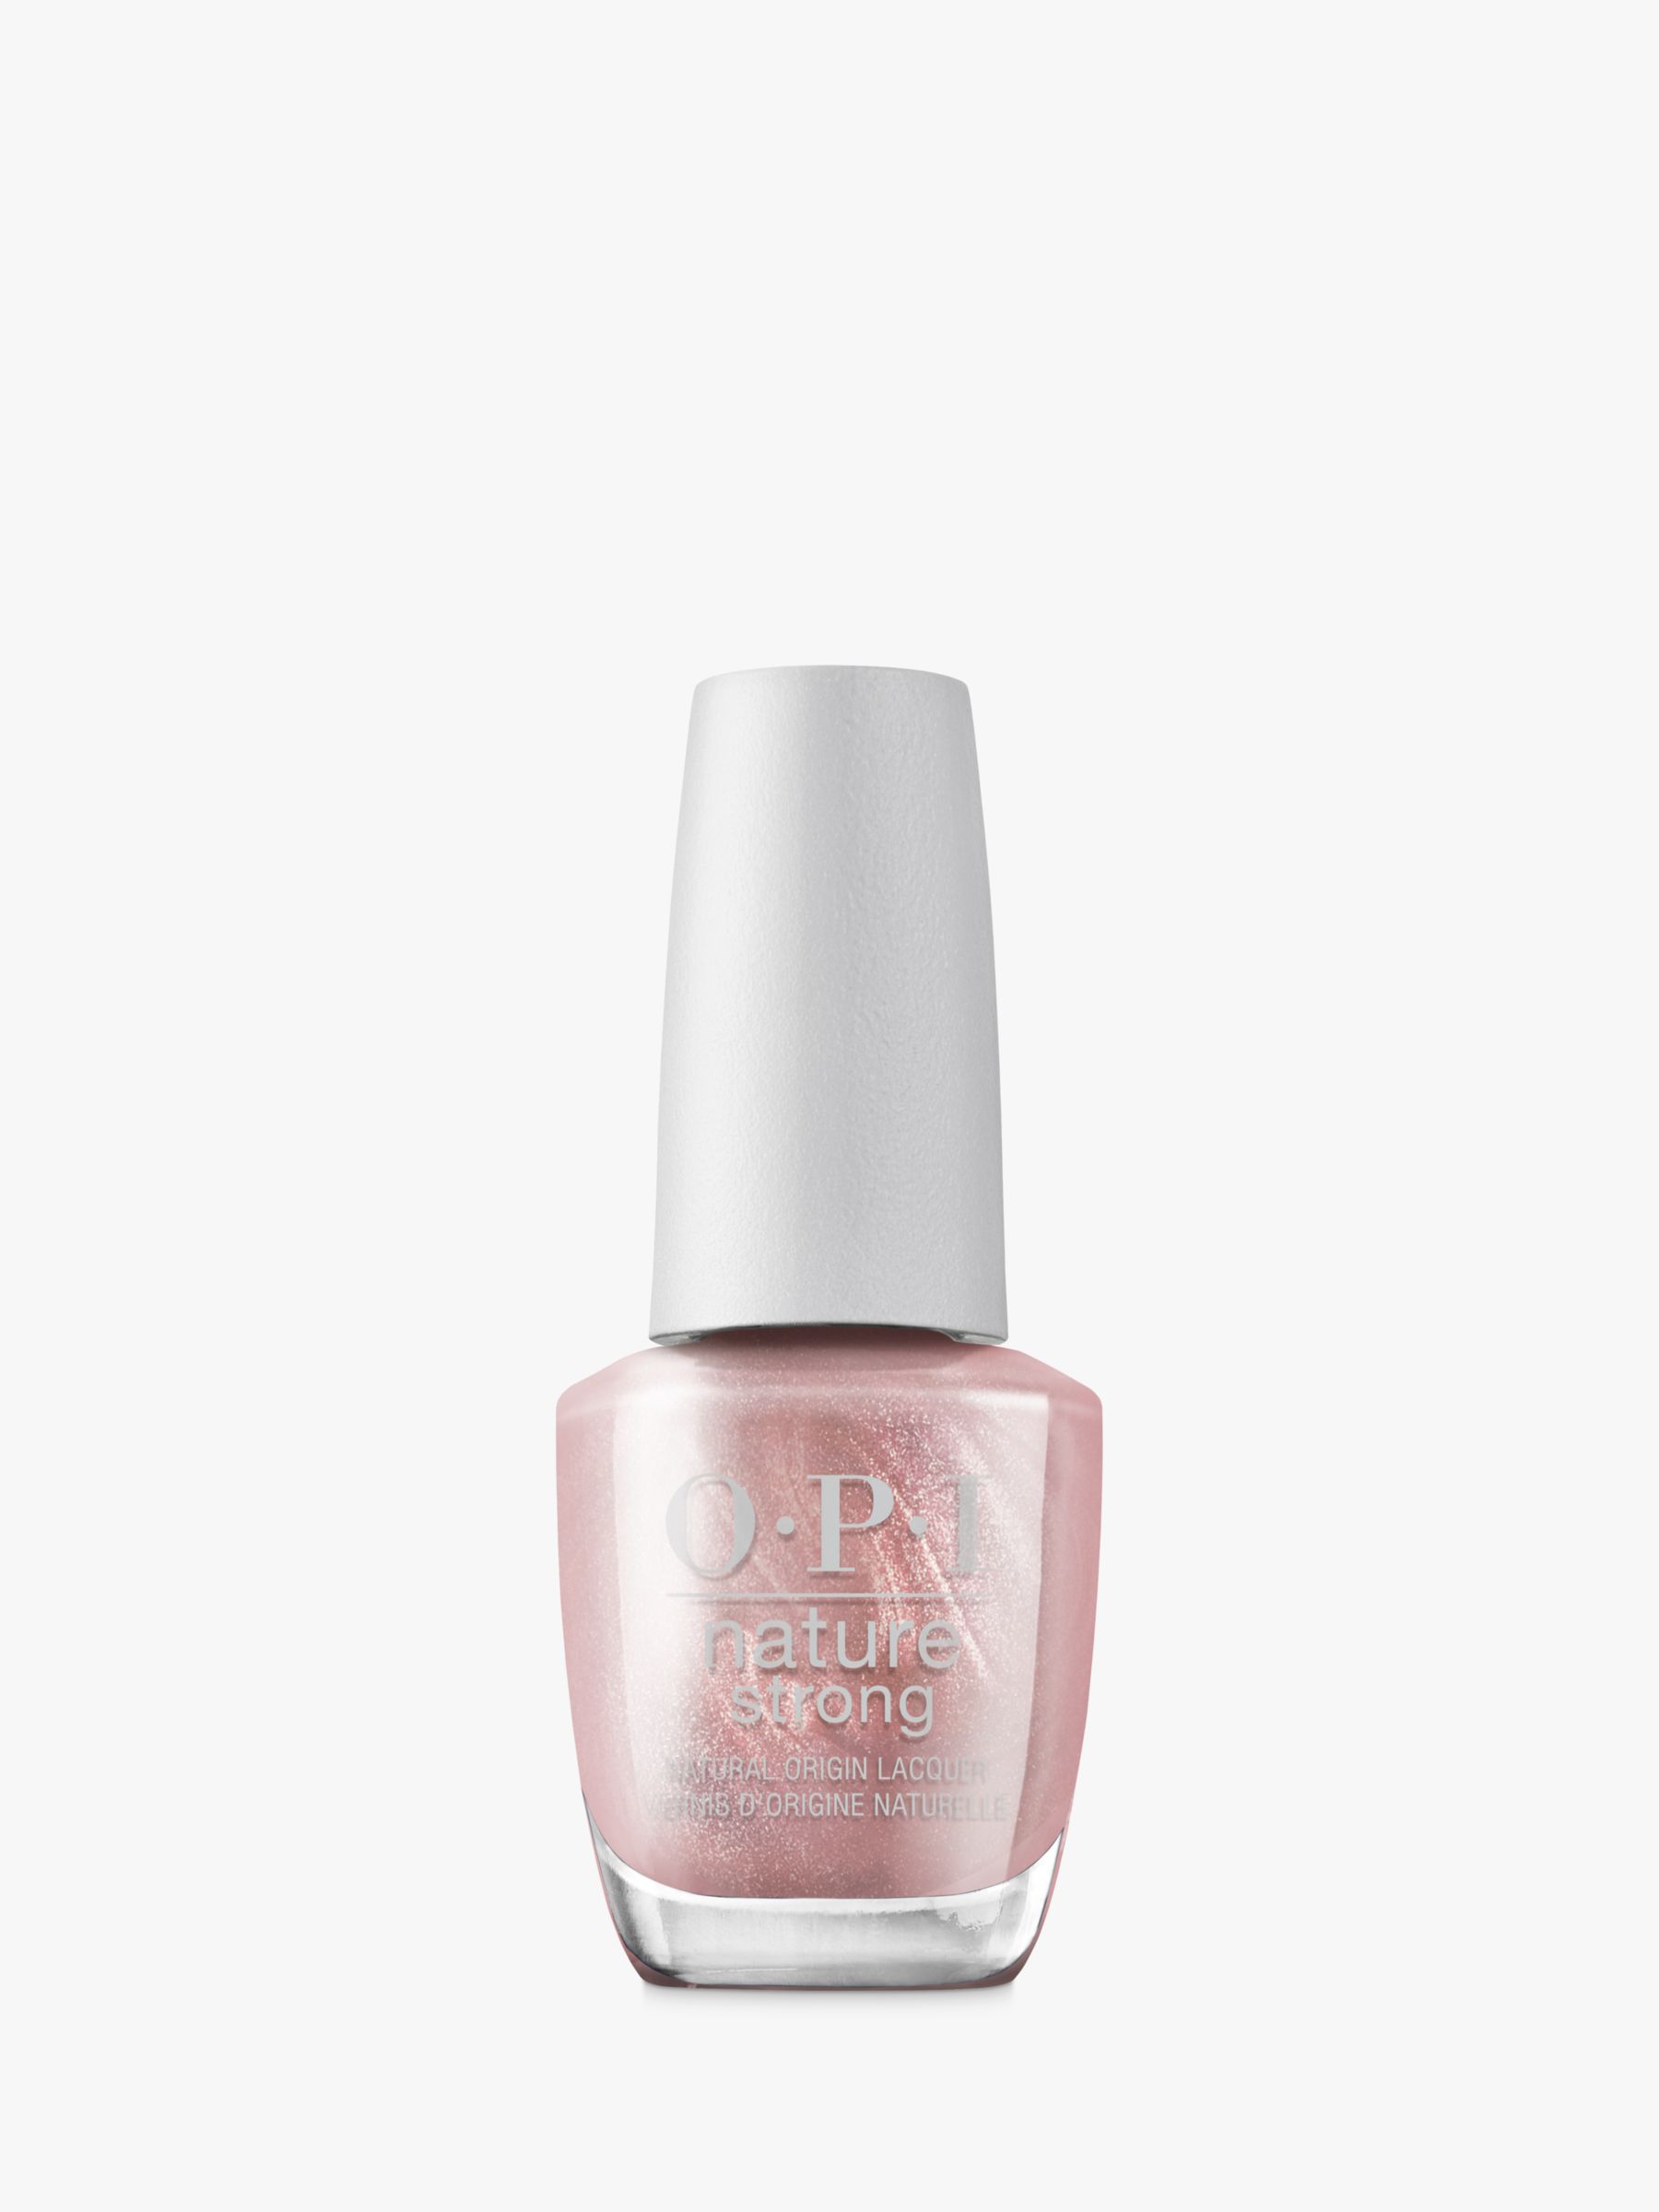 OPI Nature Strong Nail Lacquer, Intentions are Rose Gold 1